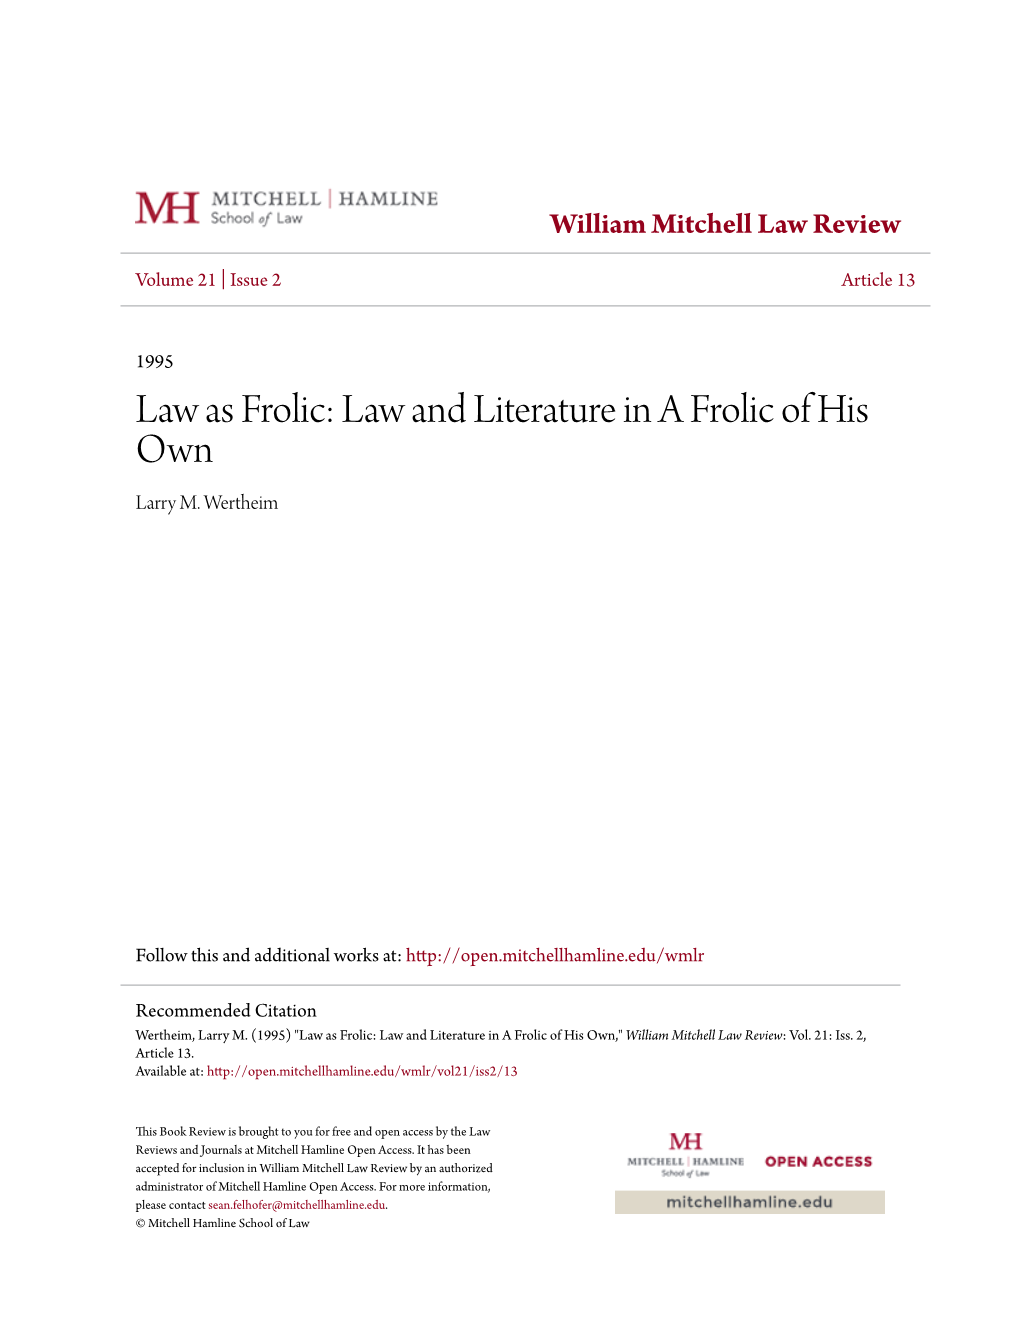 Law As Frolic: Law and Literature in a Frolic of His Own Larry M